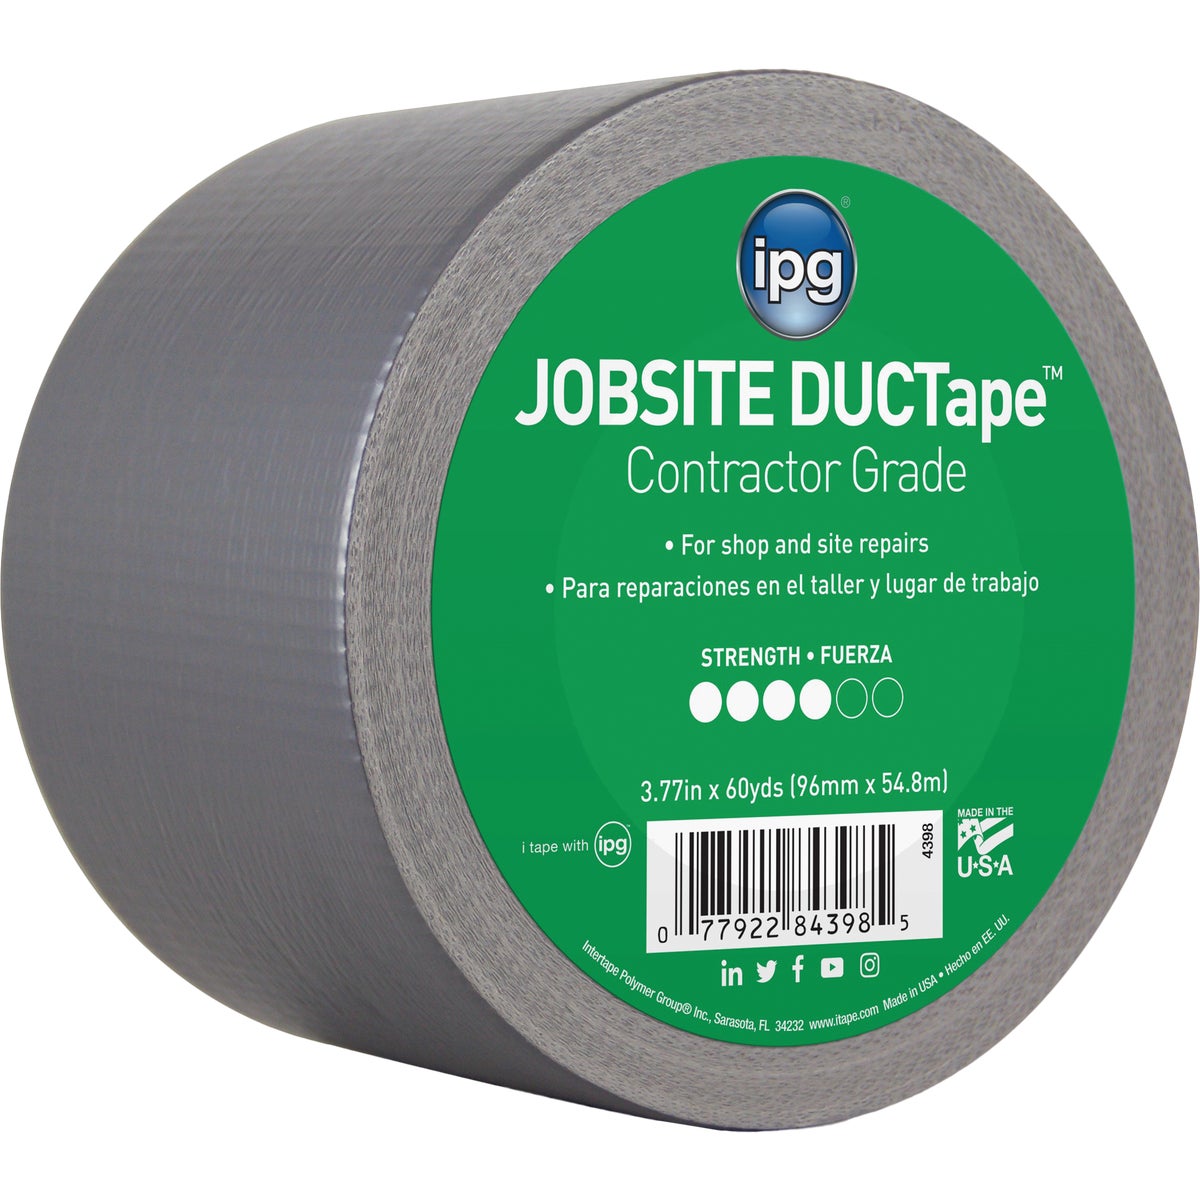 Intertape DUCTape 4 In. x 55 Yd. General Purpose Duct Tape, Silver